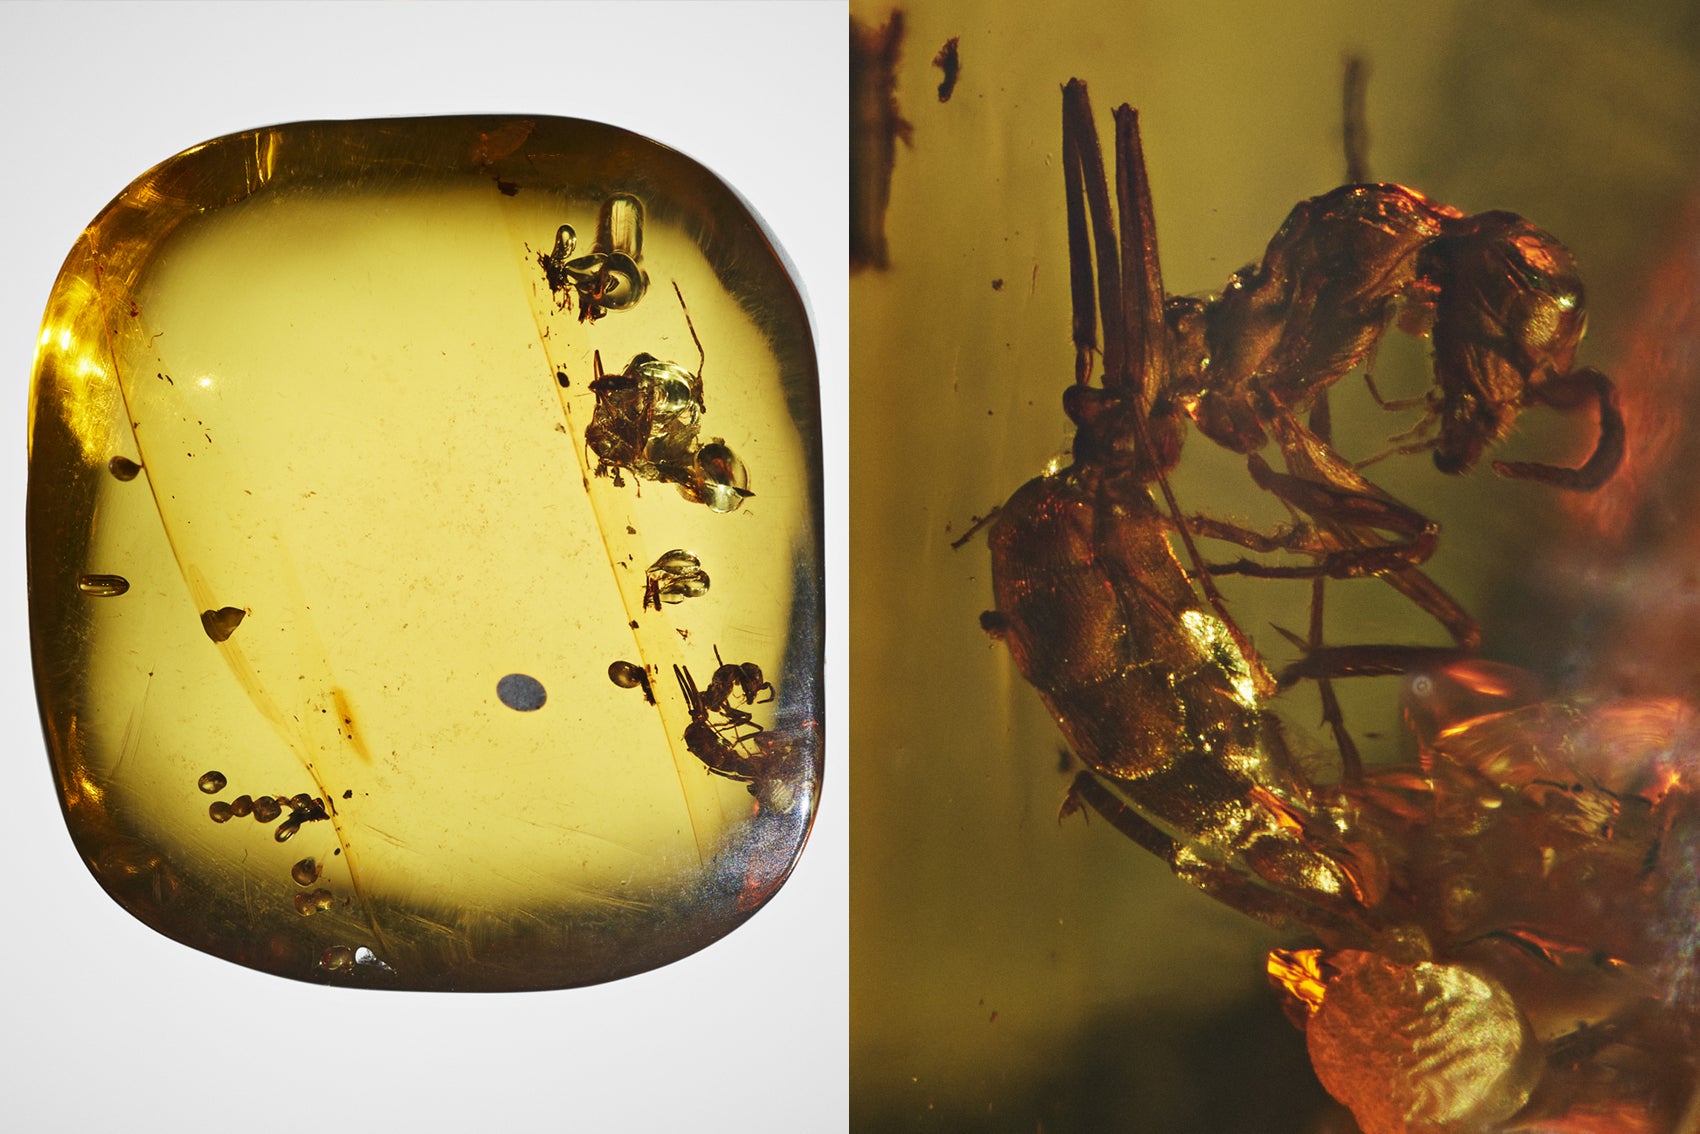 Ants fossilized in pale yellow amber closeup